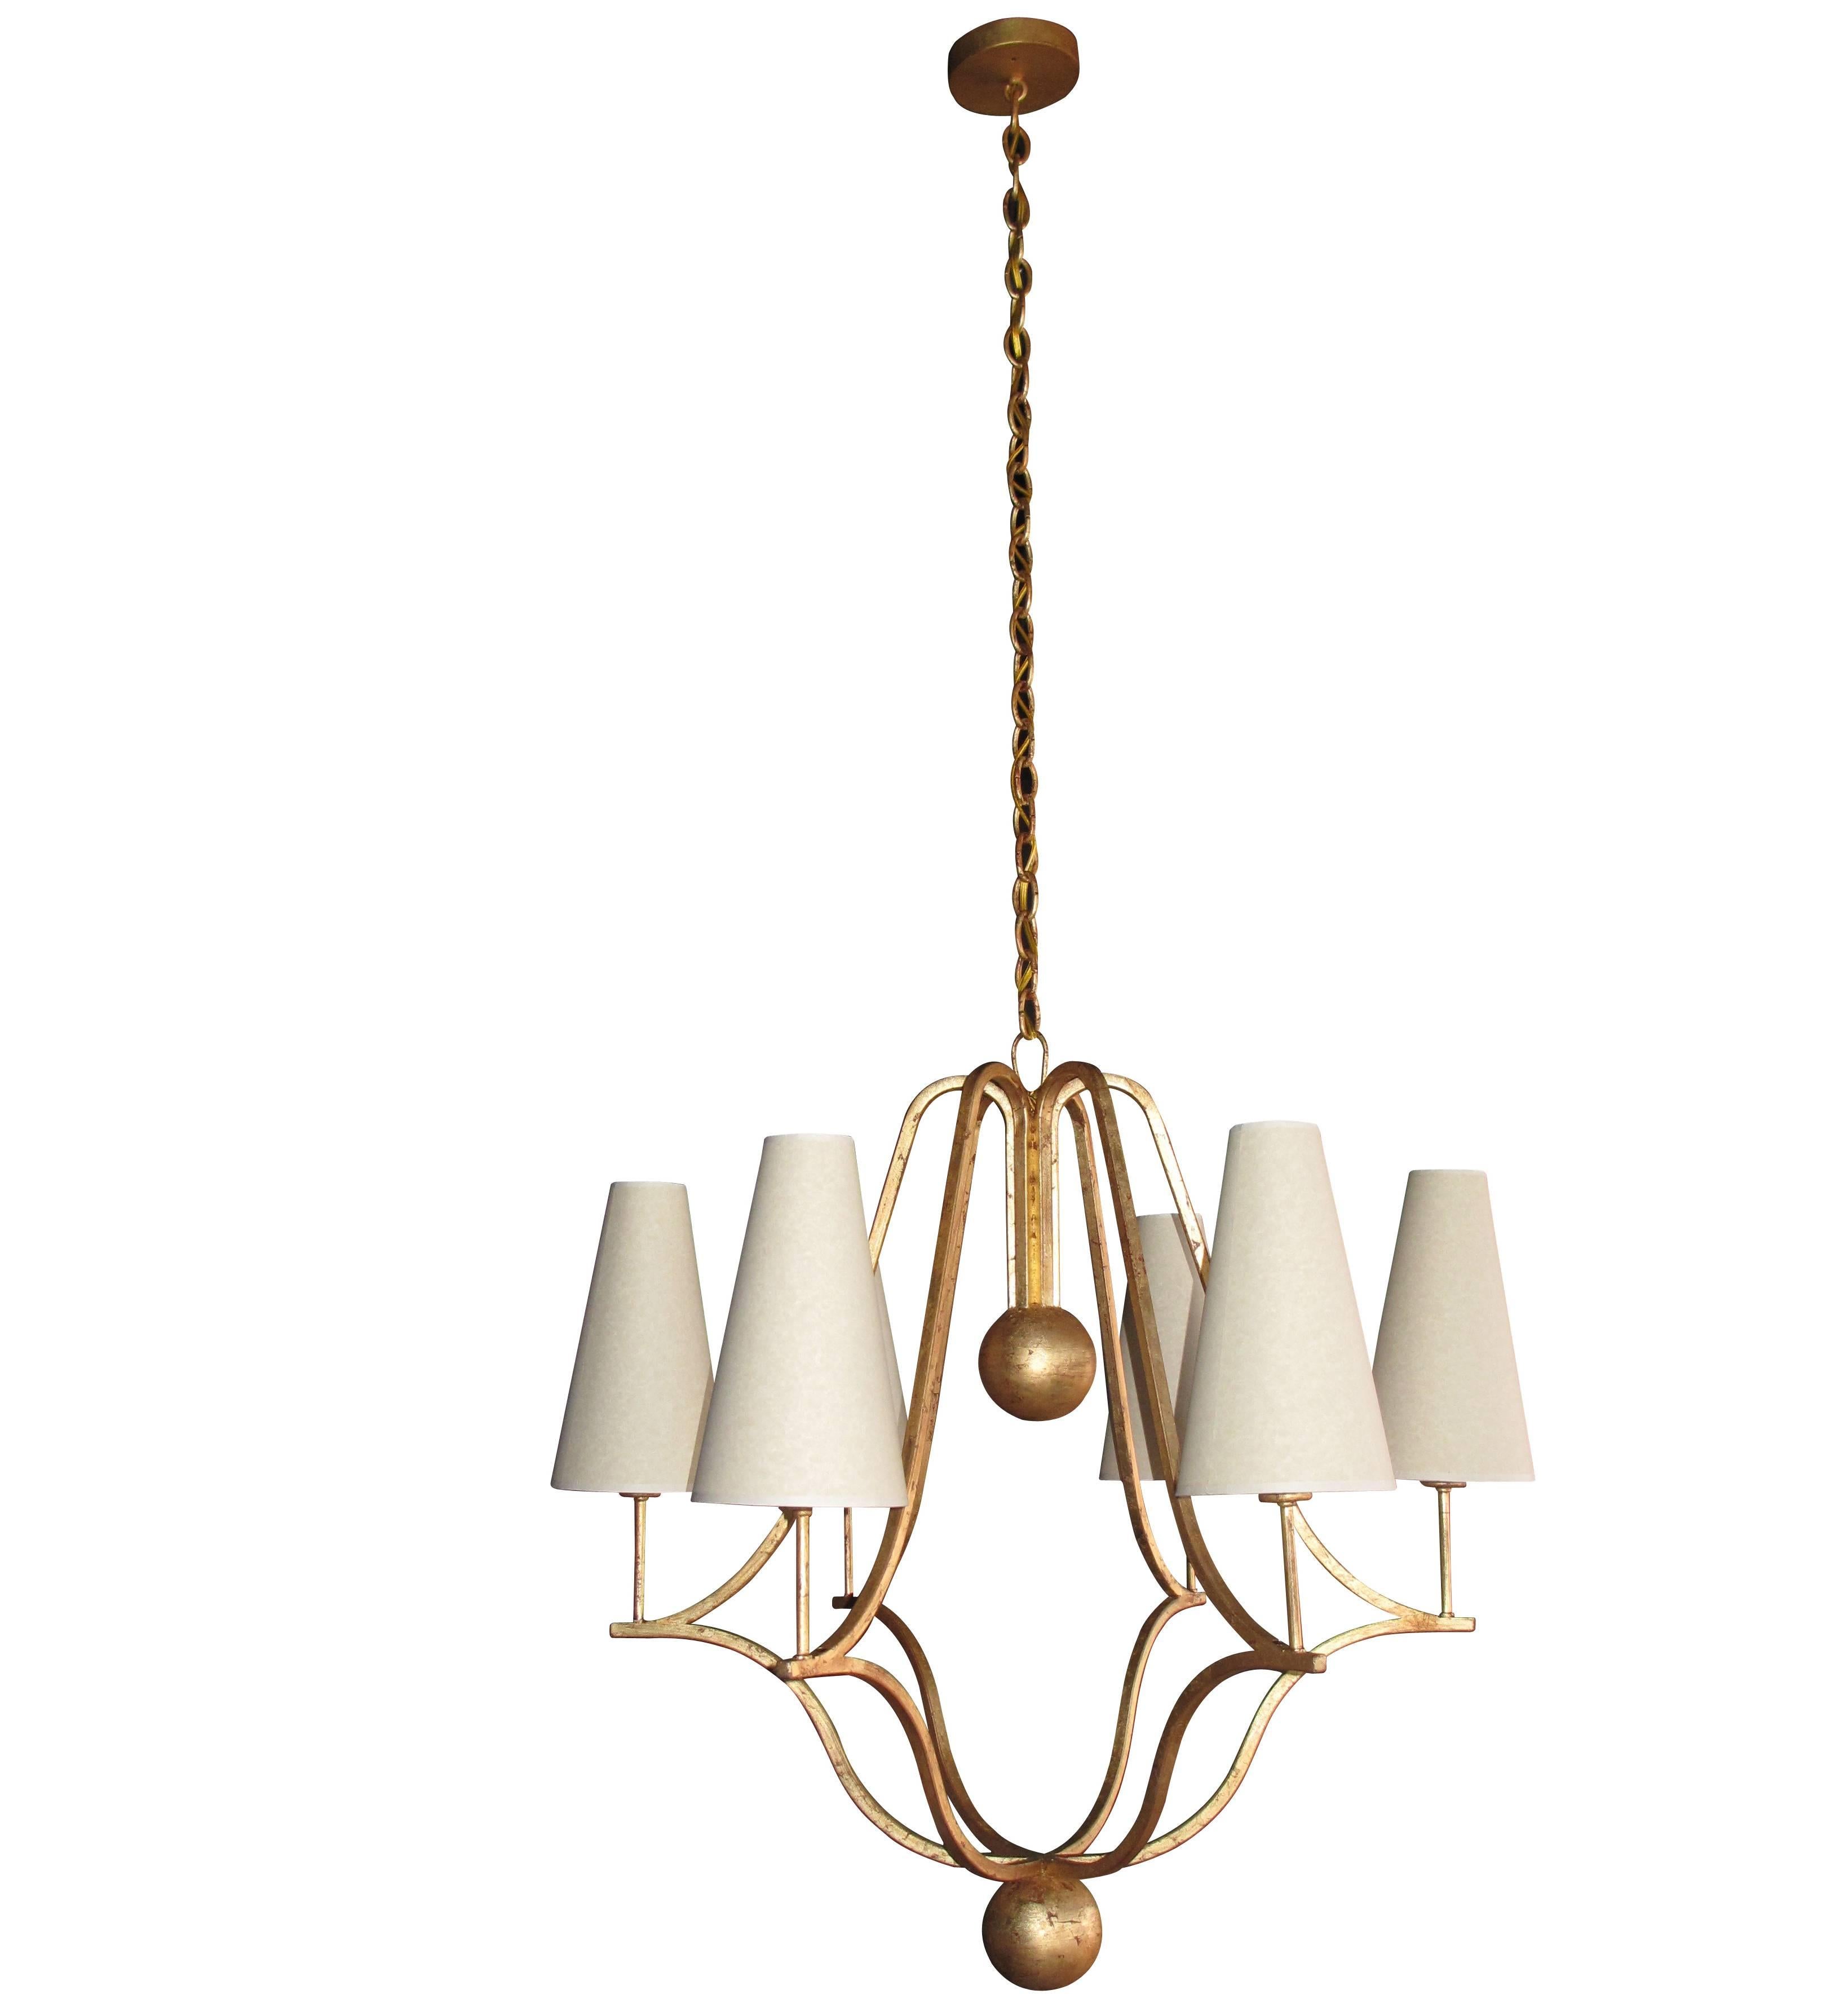 Large 'Corbeille' Gold Leaf Chandelier in the Style of Jean Royère (Moderne)